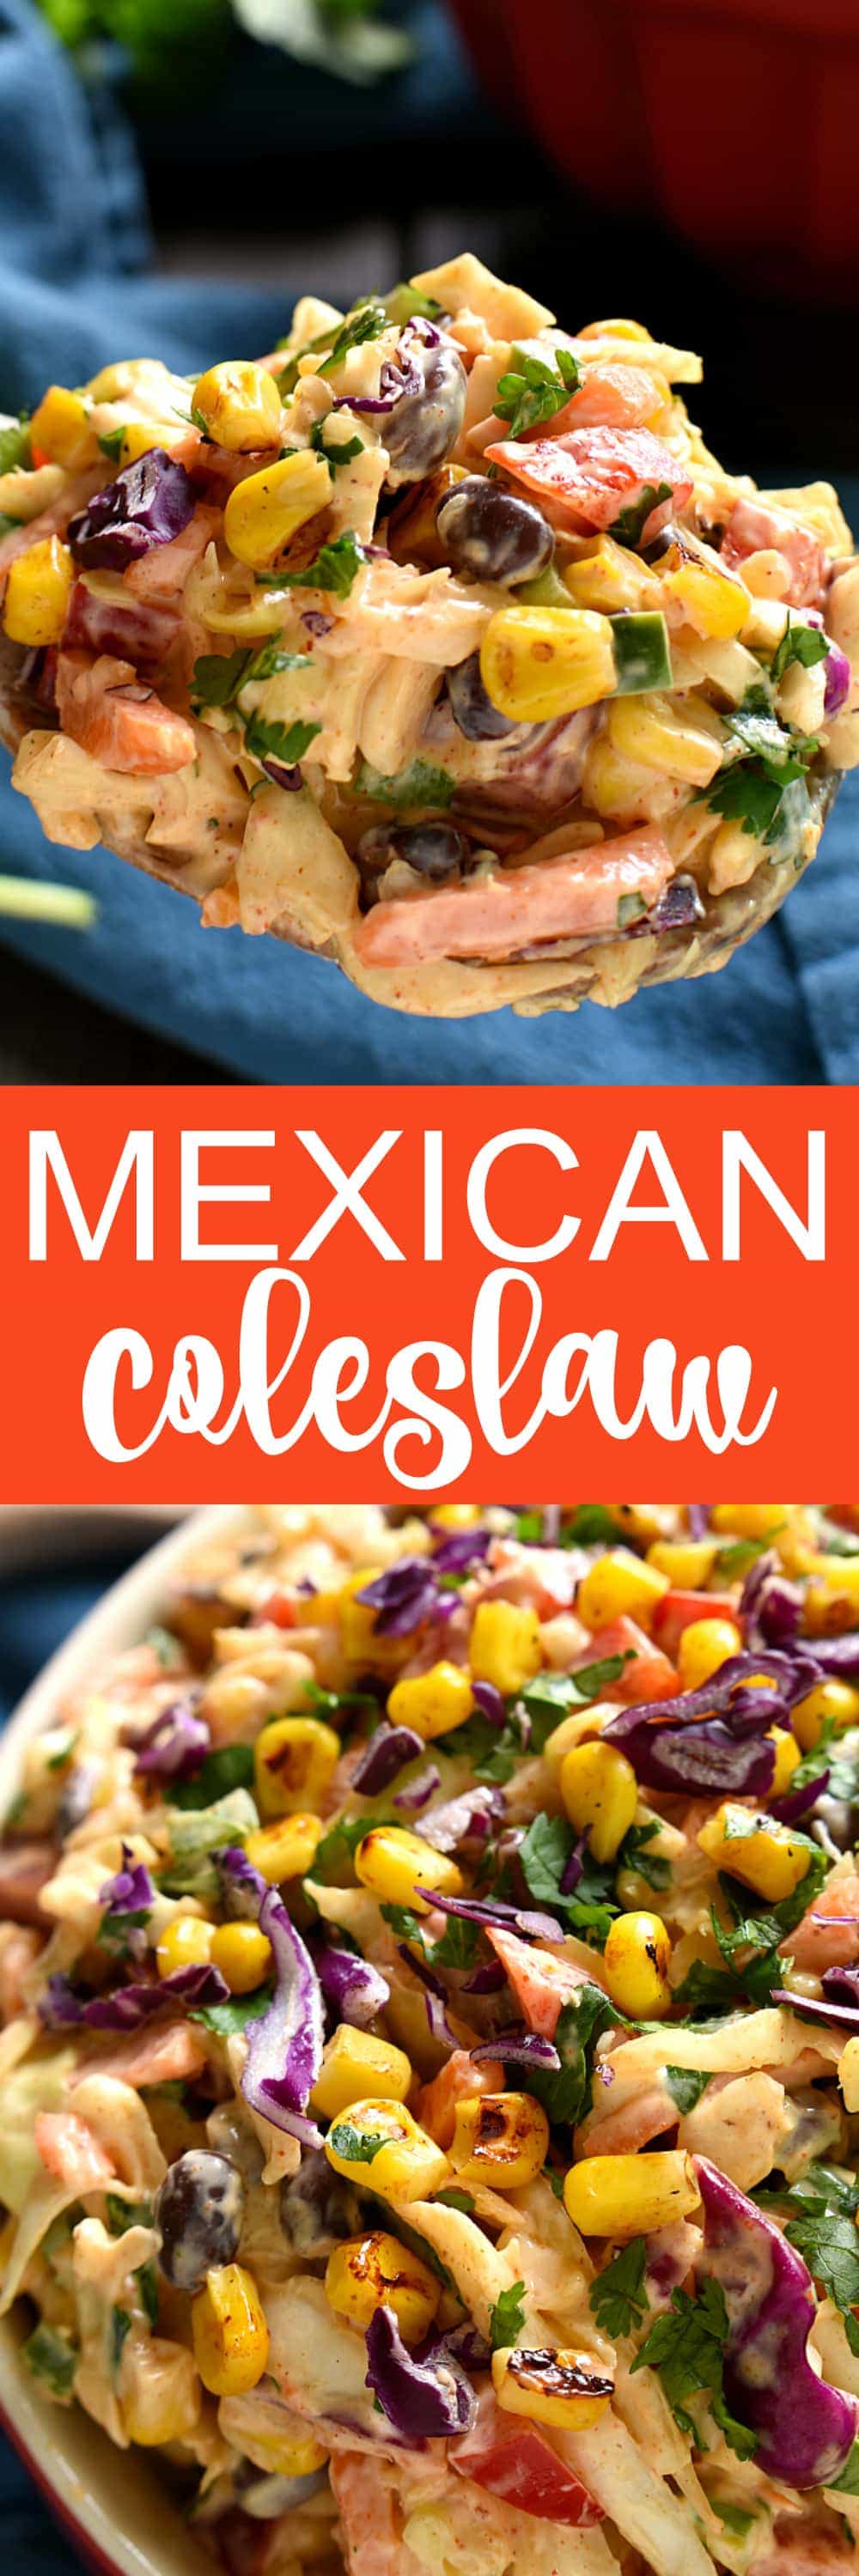 Taco Salad meets coleslaw in this deliciously creamy Mexican Coleslaw! Packed with flavor and perfect for summer cookouts!